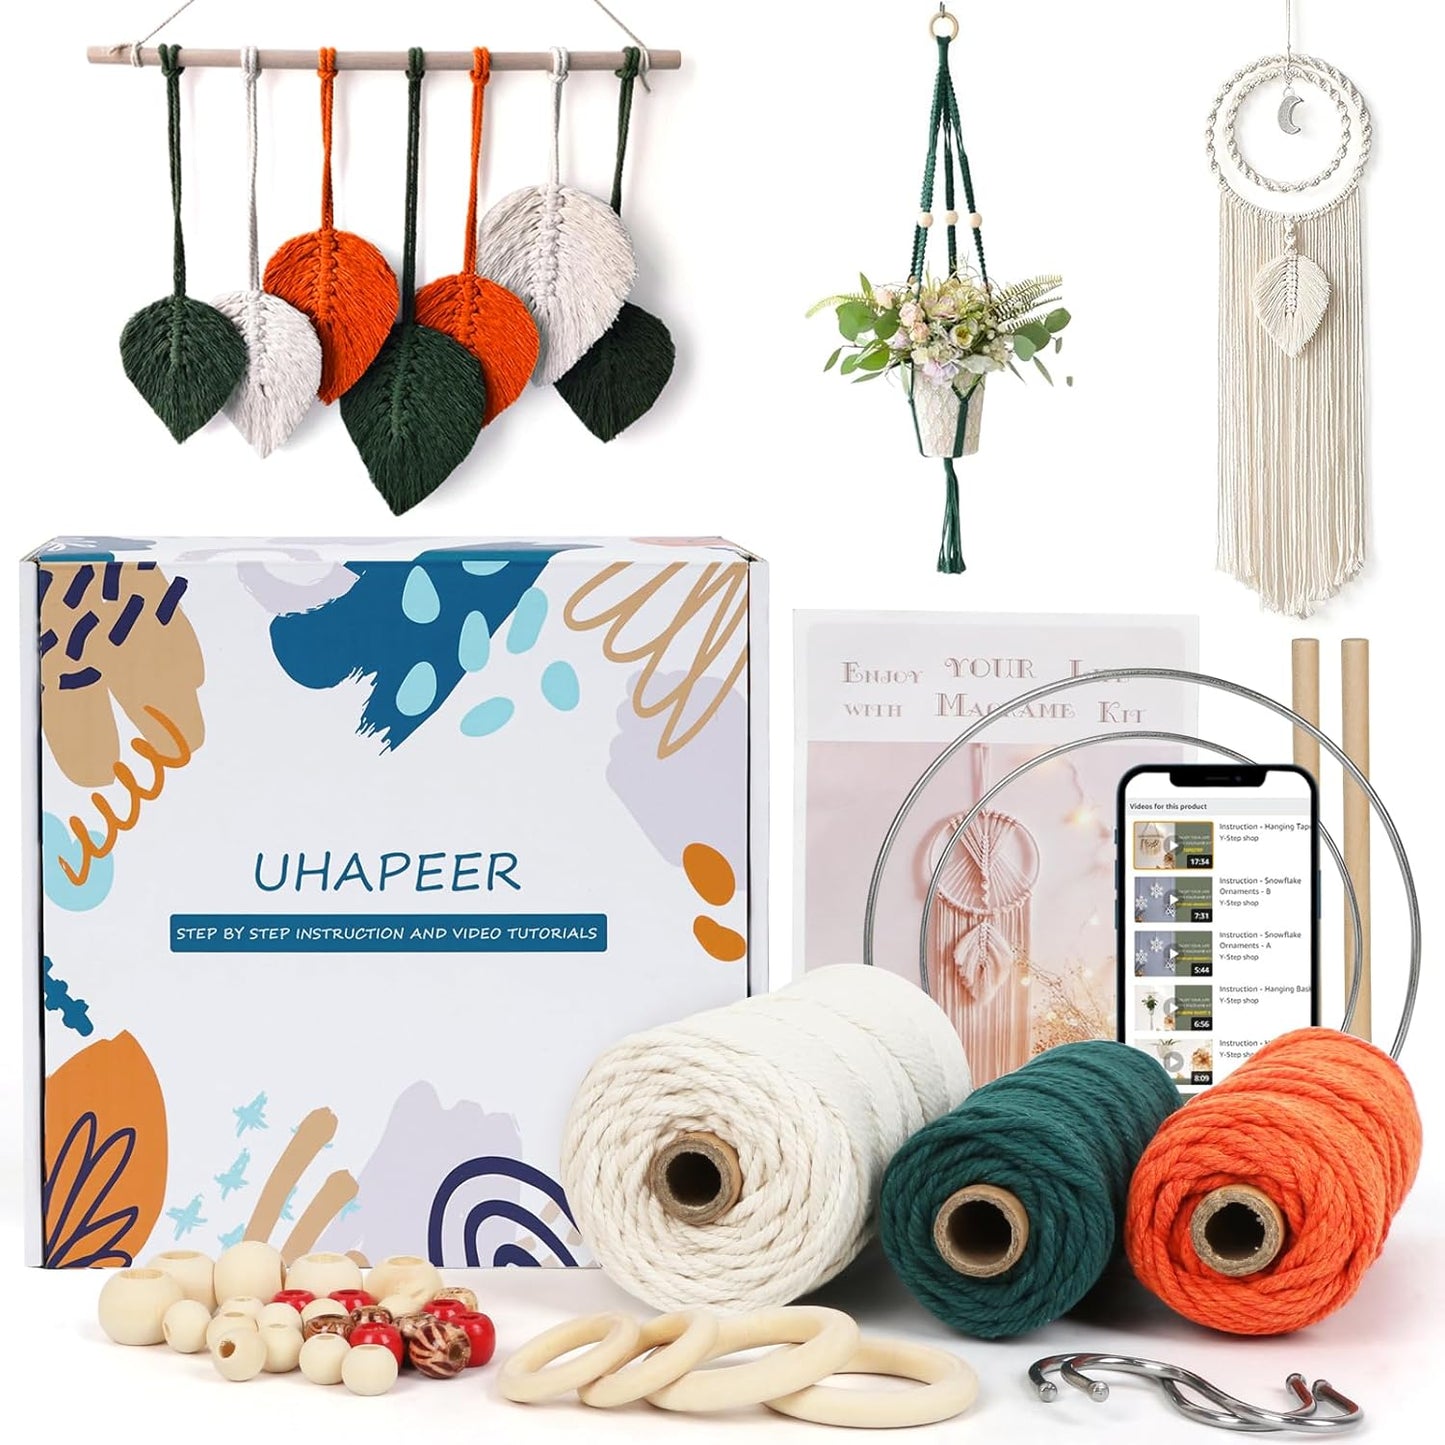 Macrame Kits for Adults Beginners with 656 Feet 3 Mm Macrame Cotton Cord, DIY Macrame Plant Hanger Kit with Macrame Supplies and Instructions, Macrame Meads, Wooden Rings, Dream Catcher Rings